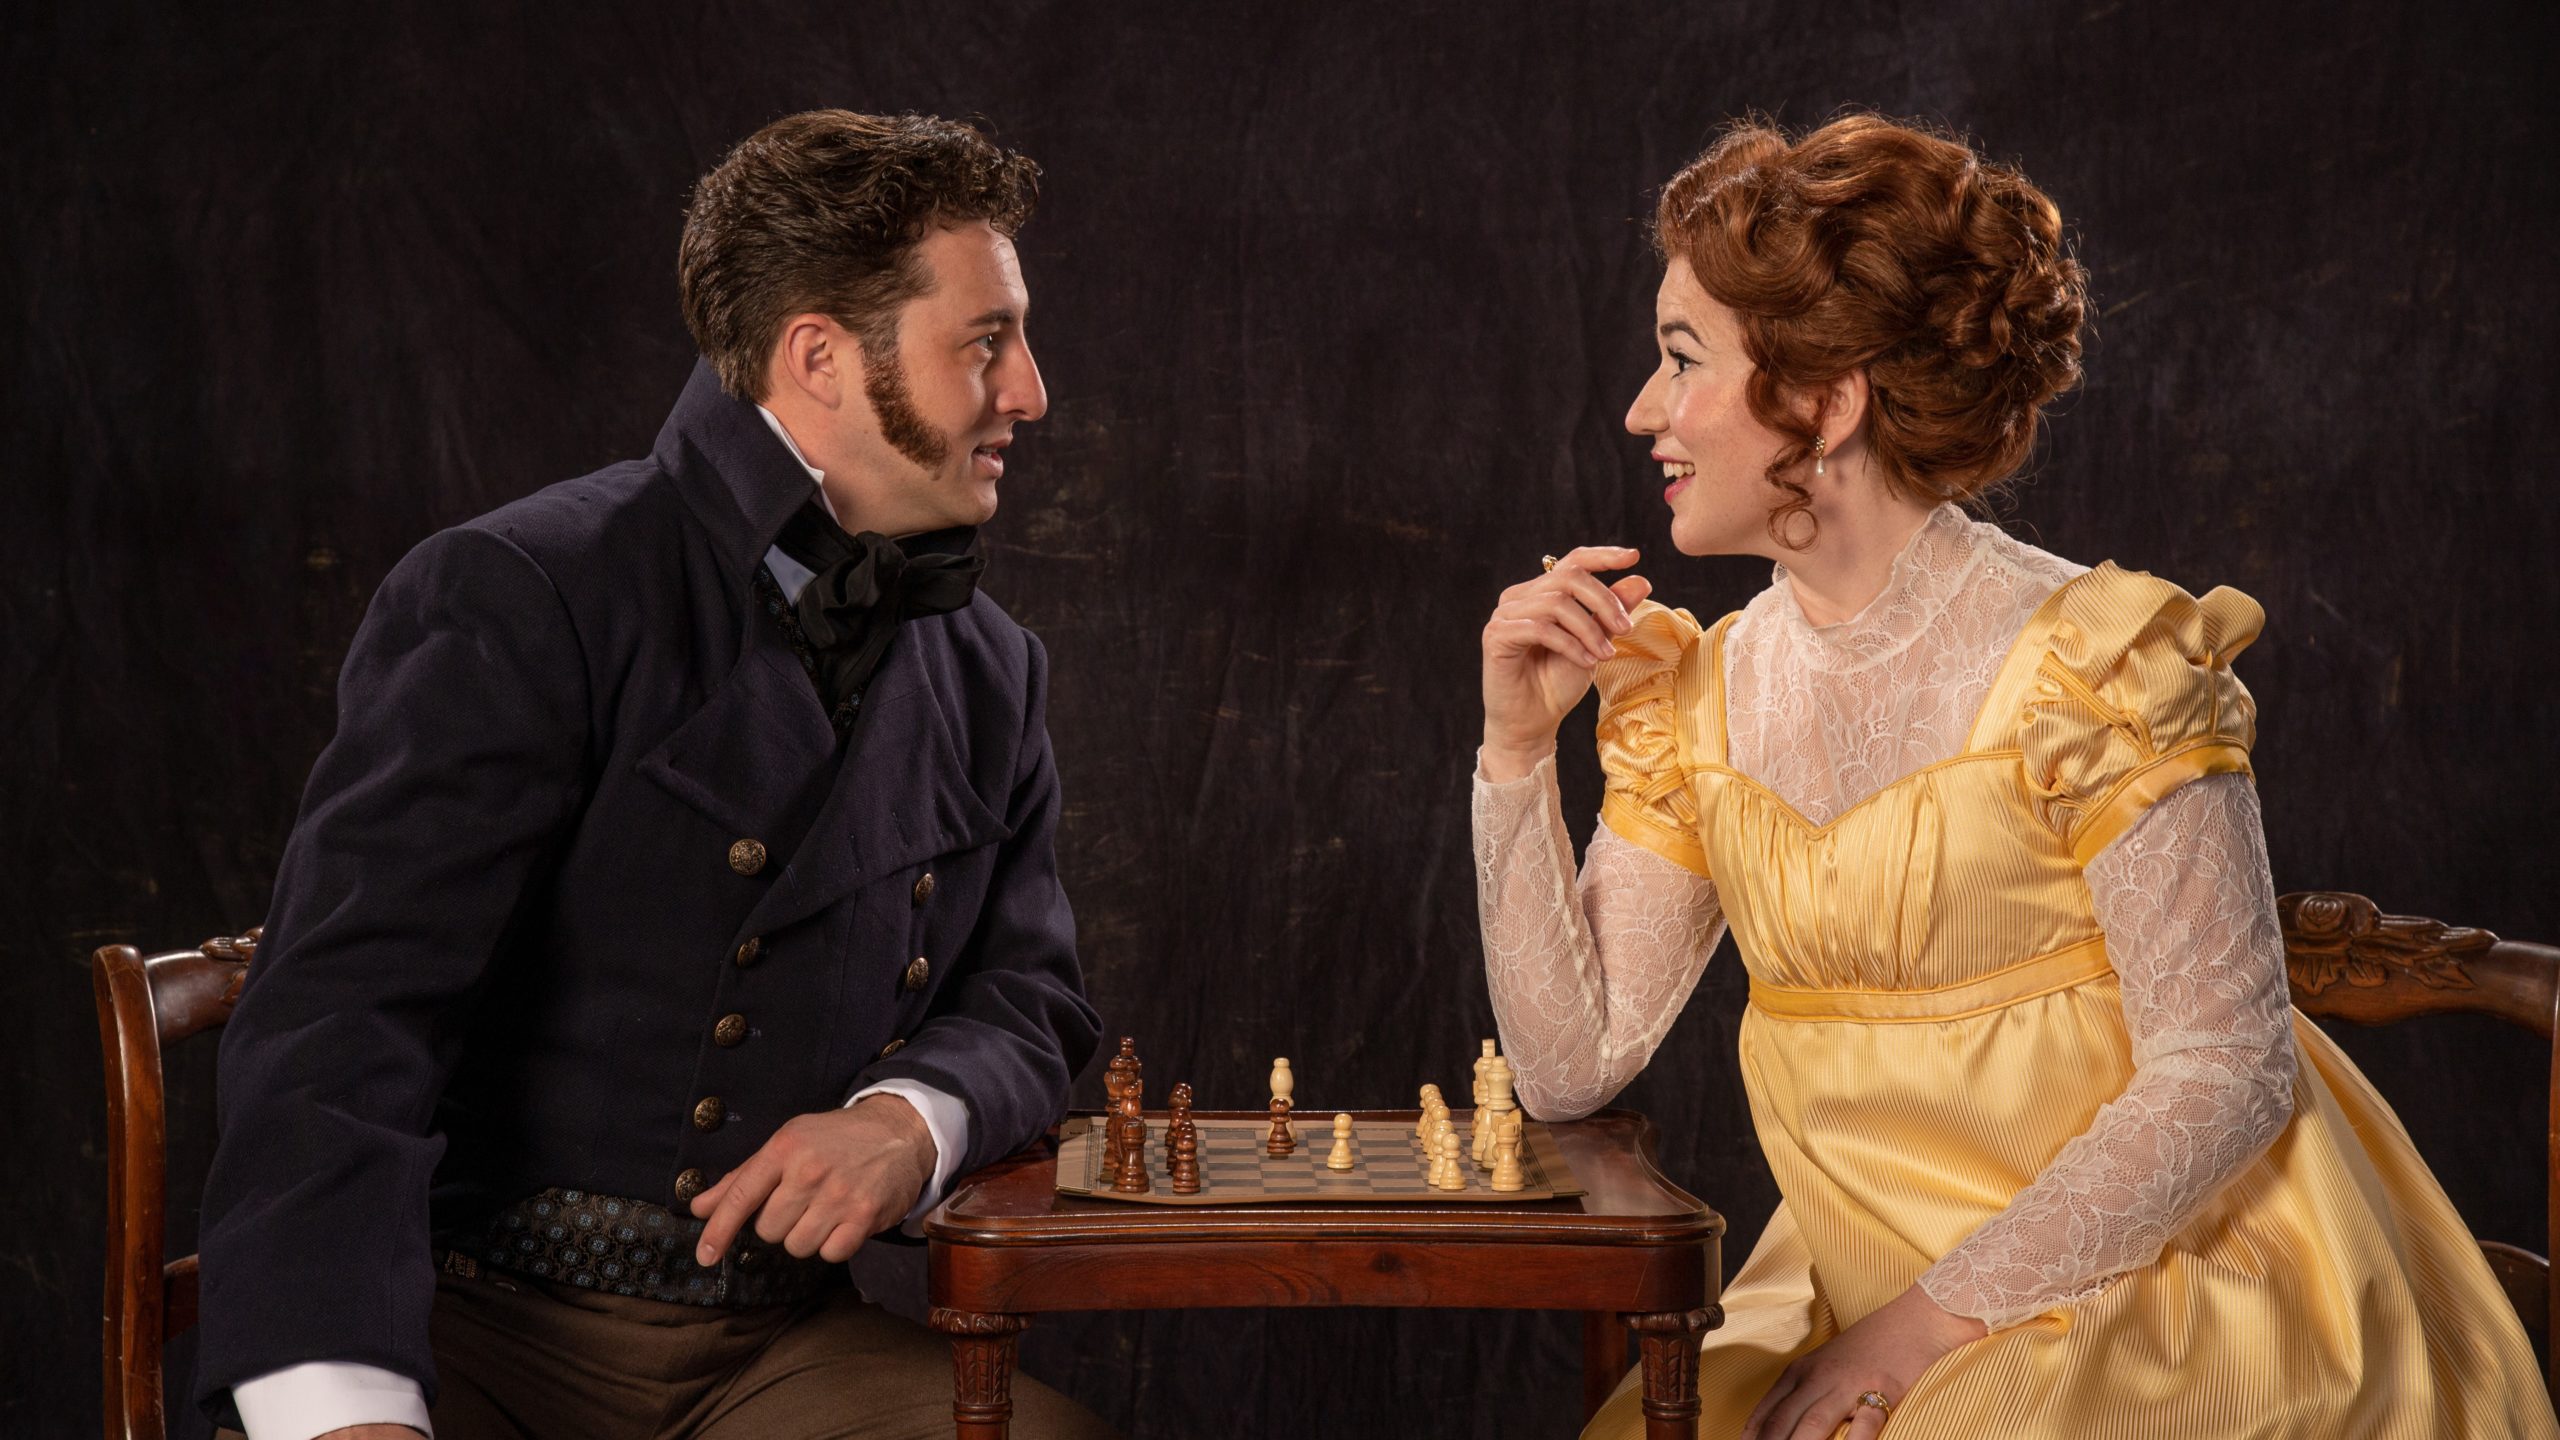 Costumes, Production Design Highlight Class Differences in 'Emma.